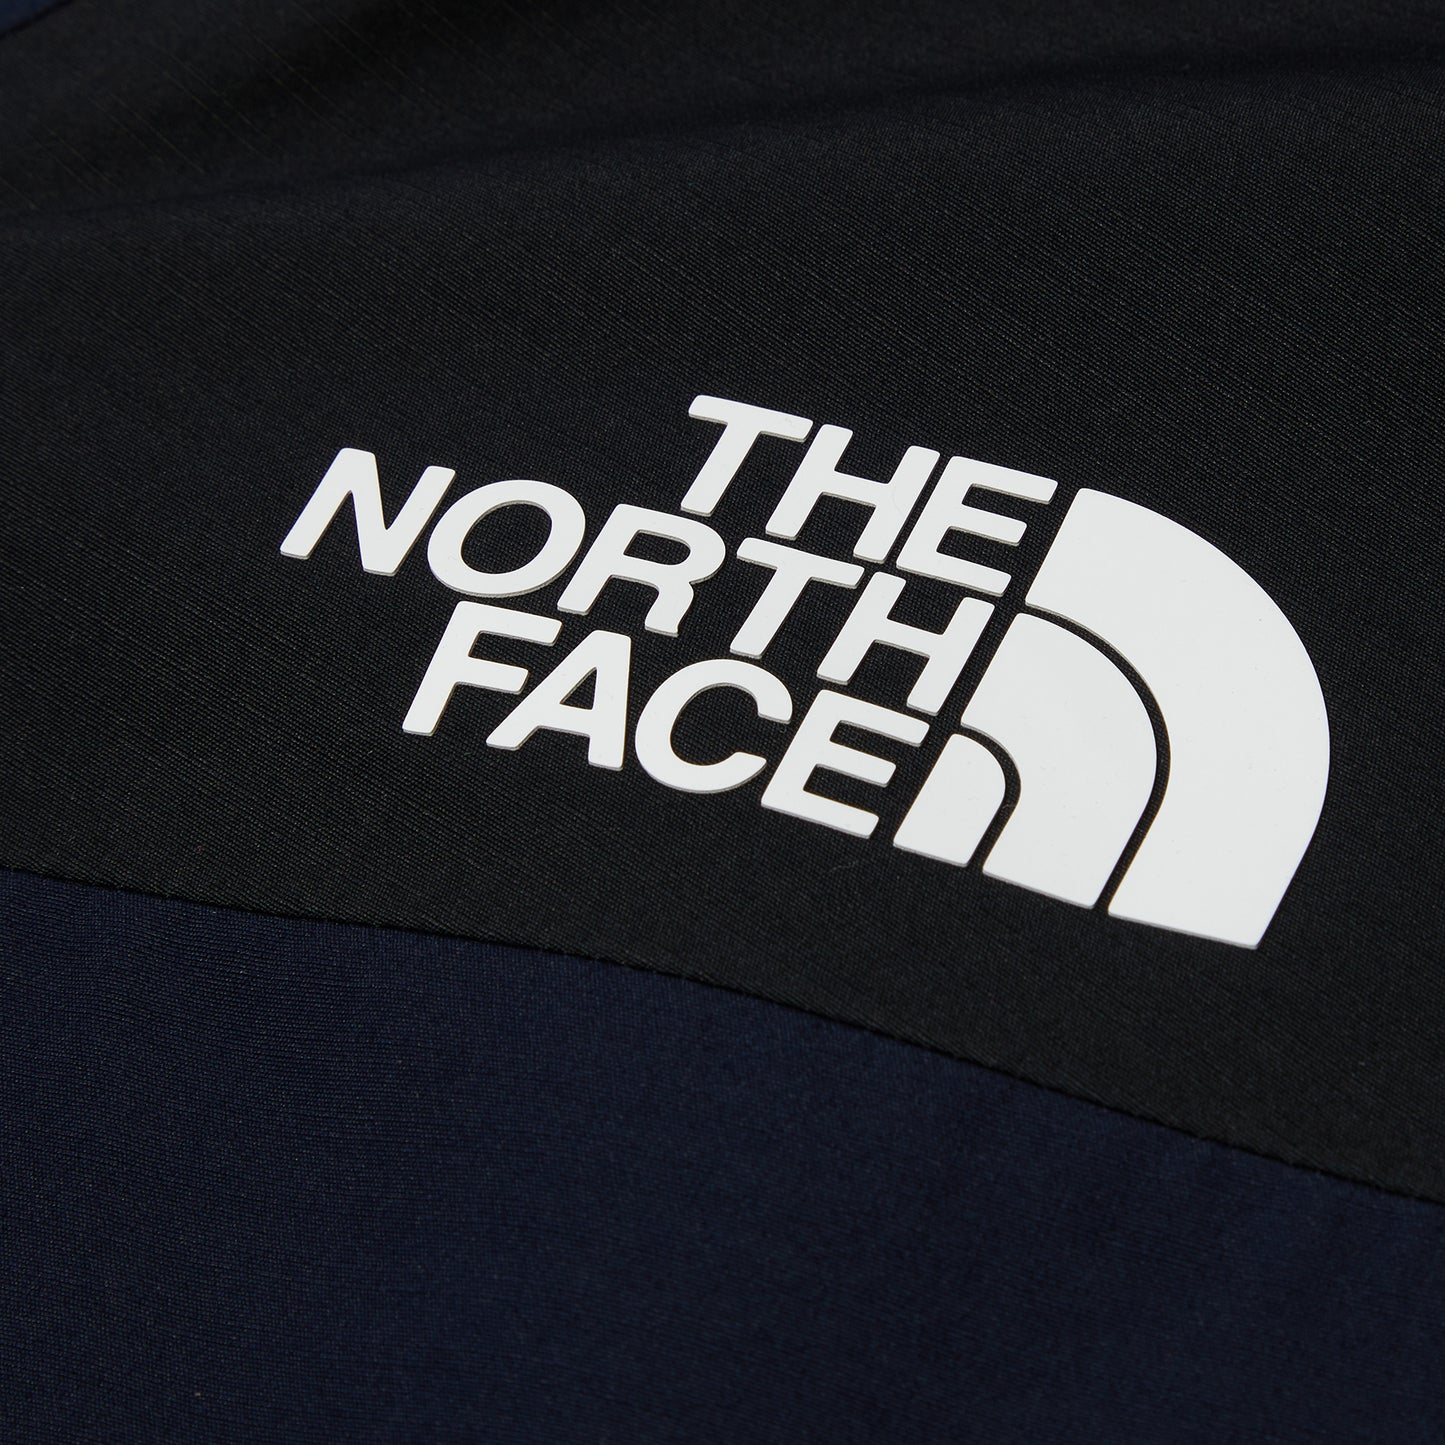 The North Face x Undercover SOUKUU Geodesic Shell Jacket (TNF Black/Aviator Navy)